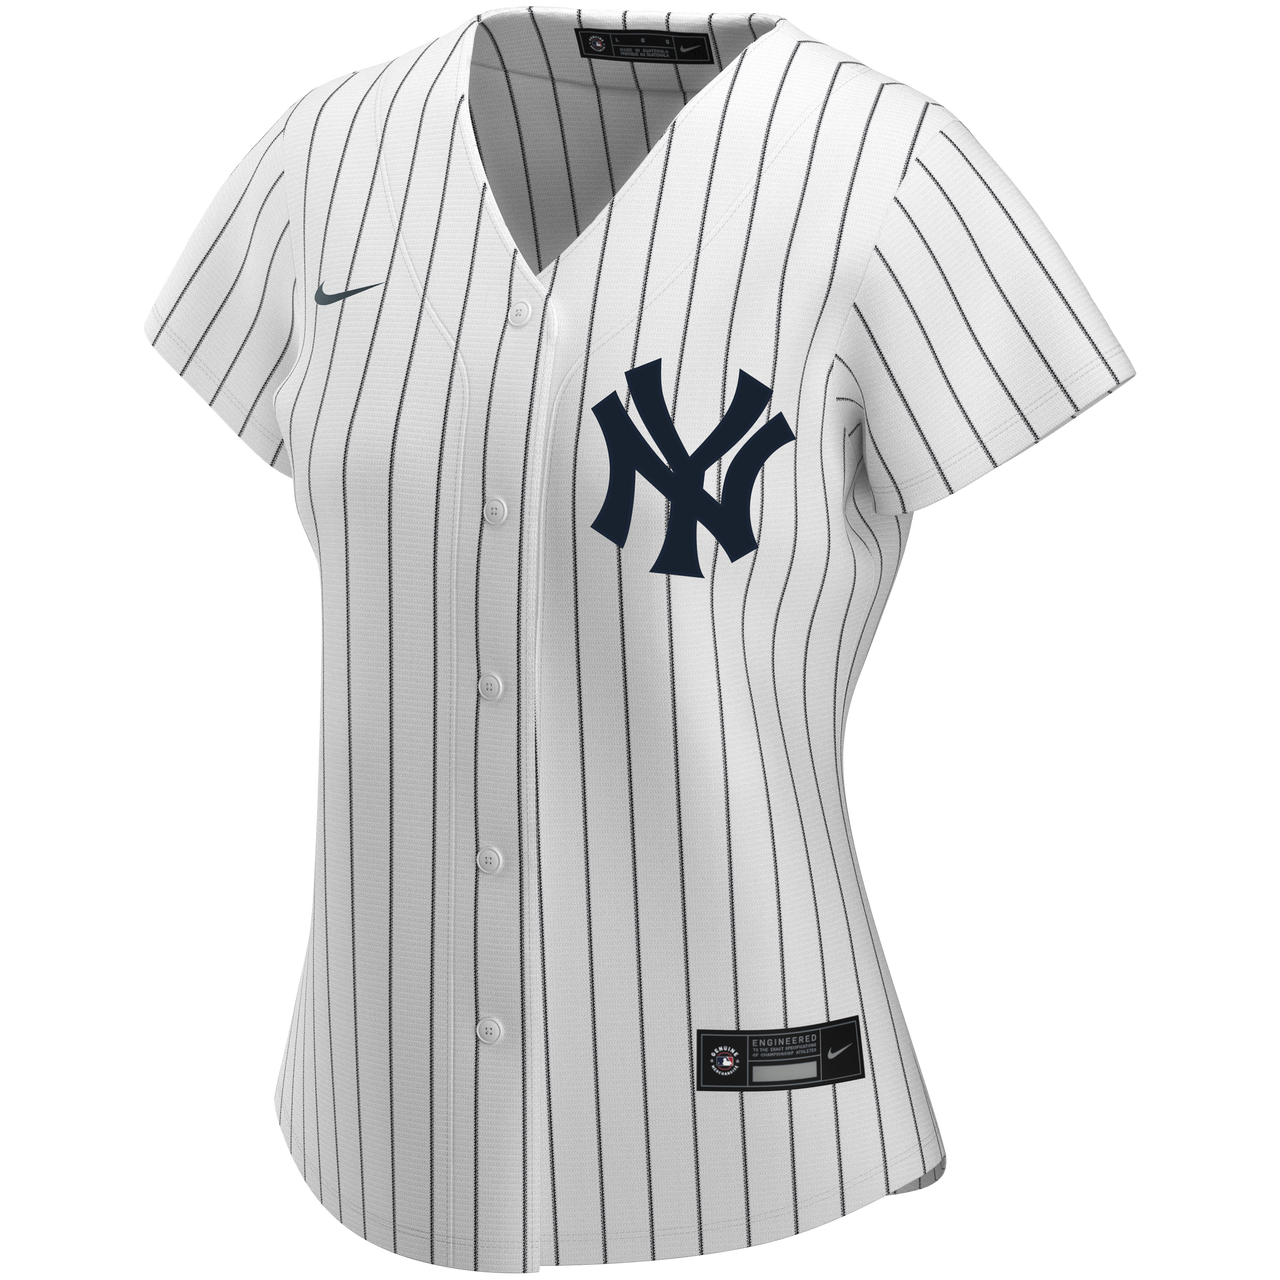 Mickey Mantle Jersey, Mickey Mantle Gear and Apparel